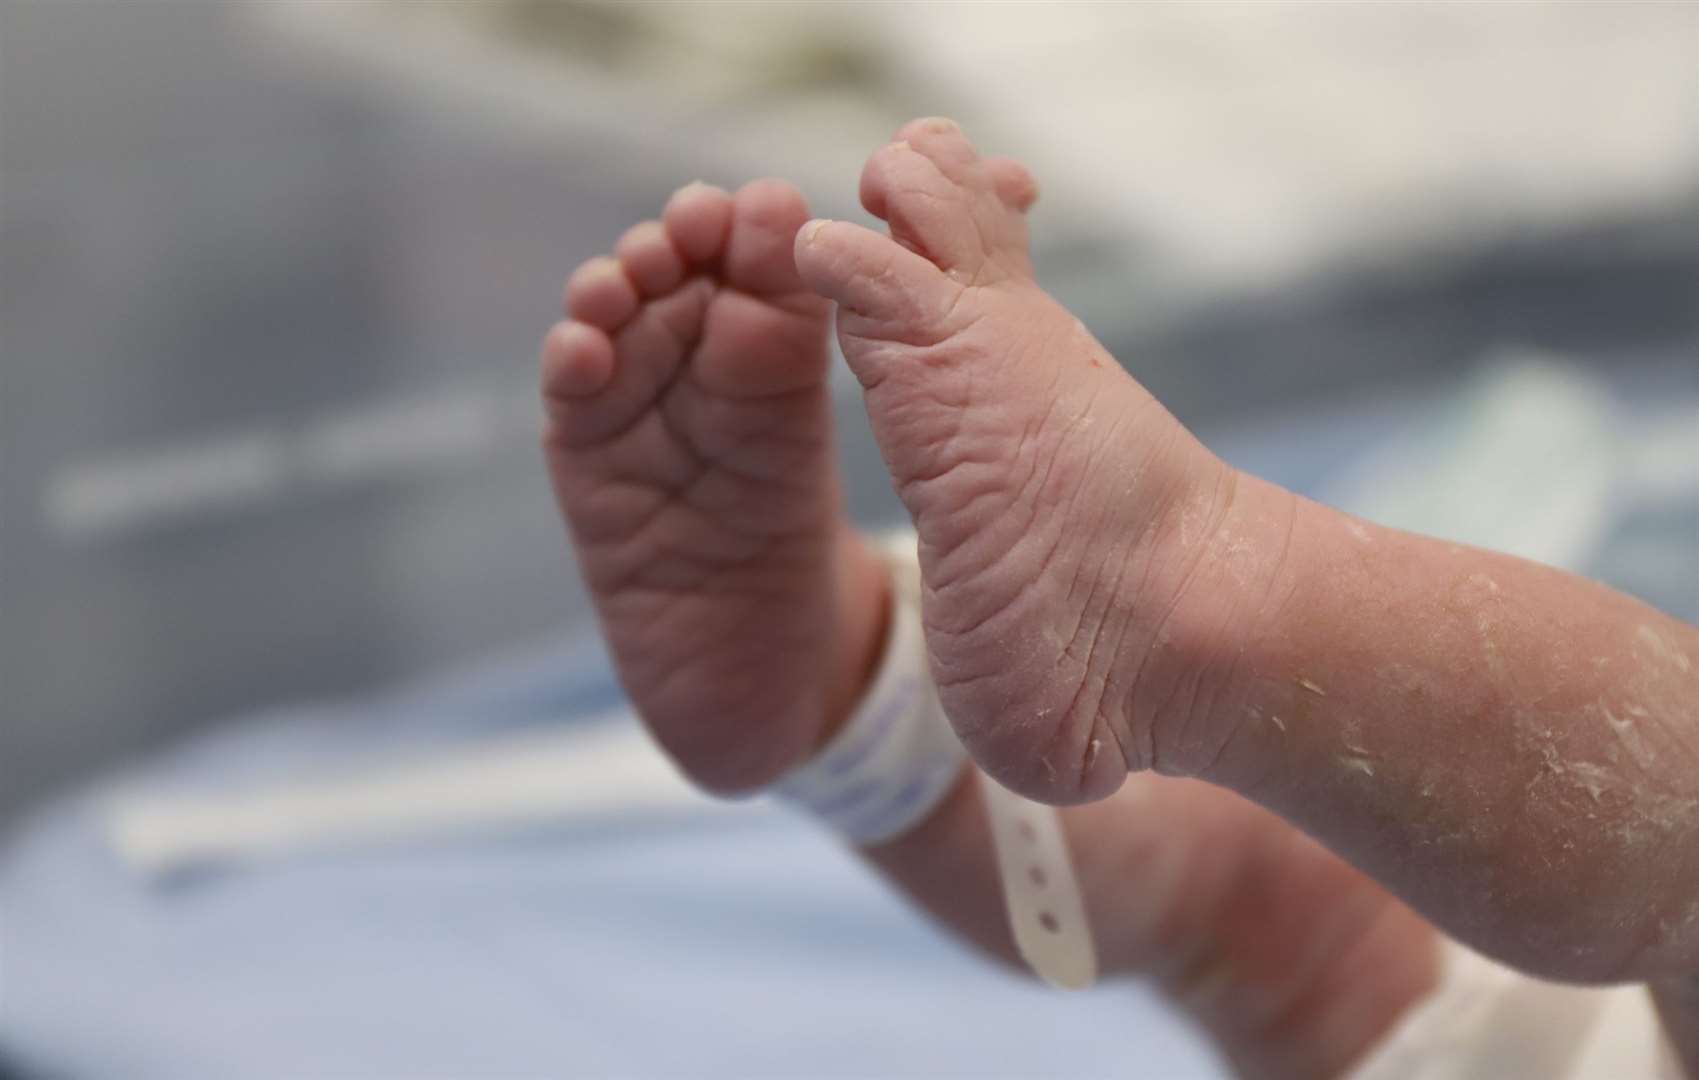 The money can be claimed from the day after a child’s birth is registered. Image: iStock.